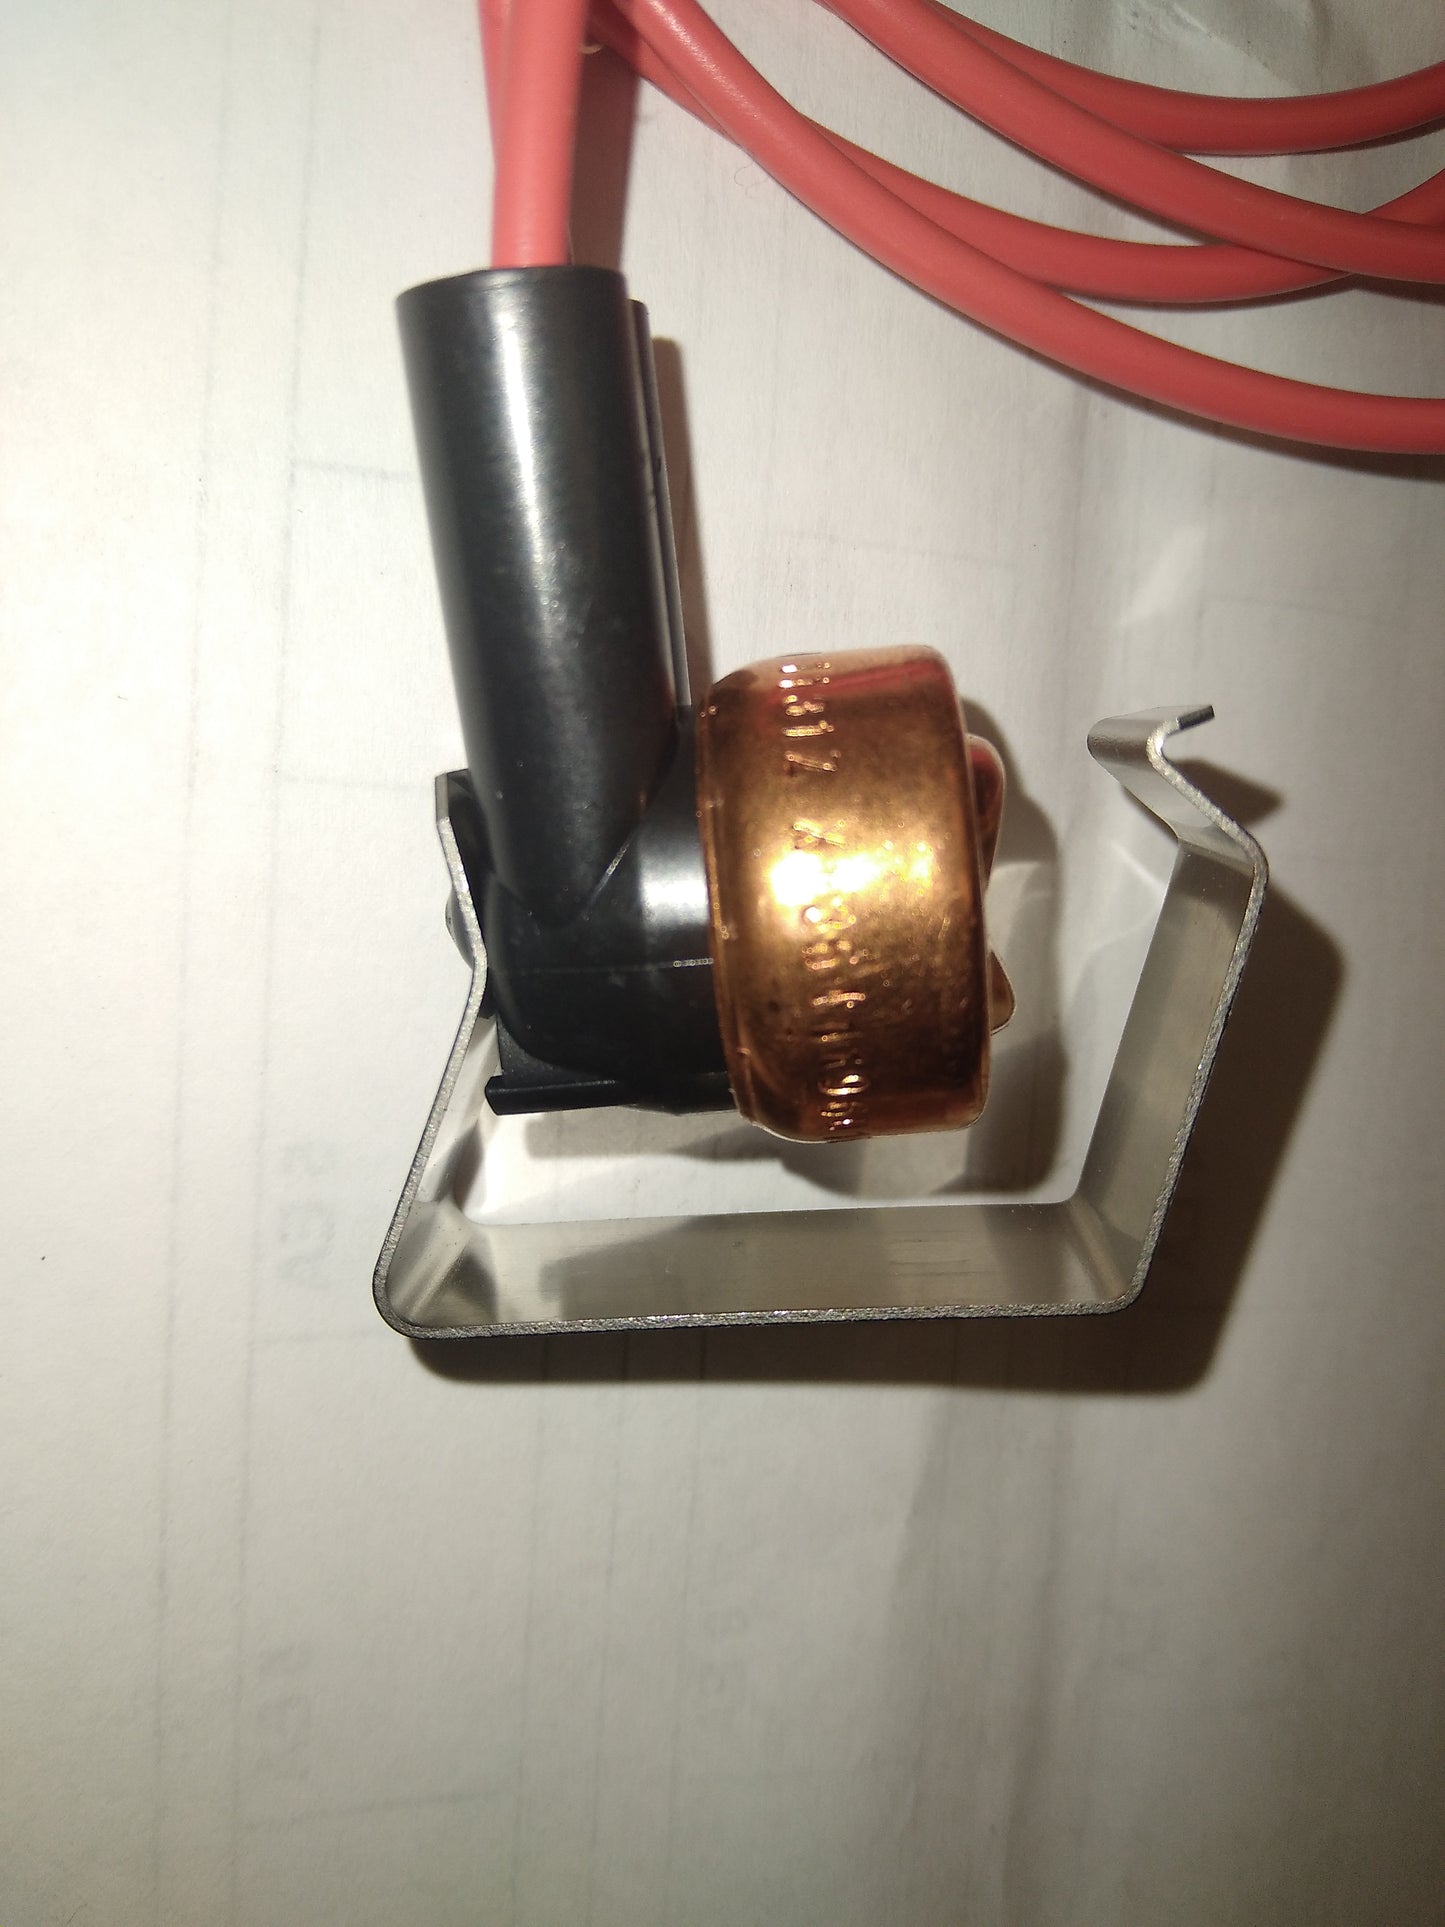 DEFROST THERMOSTAT WITH CLAMP L230-50F